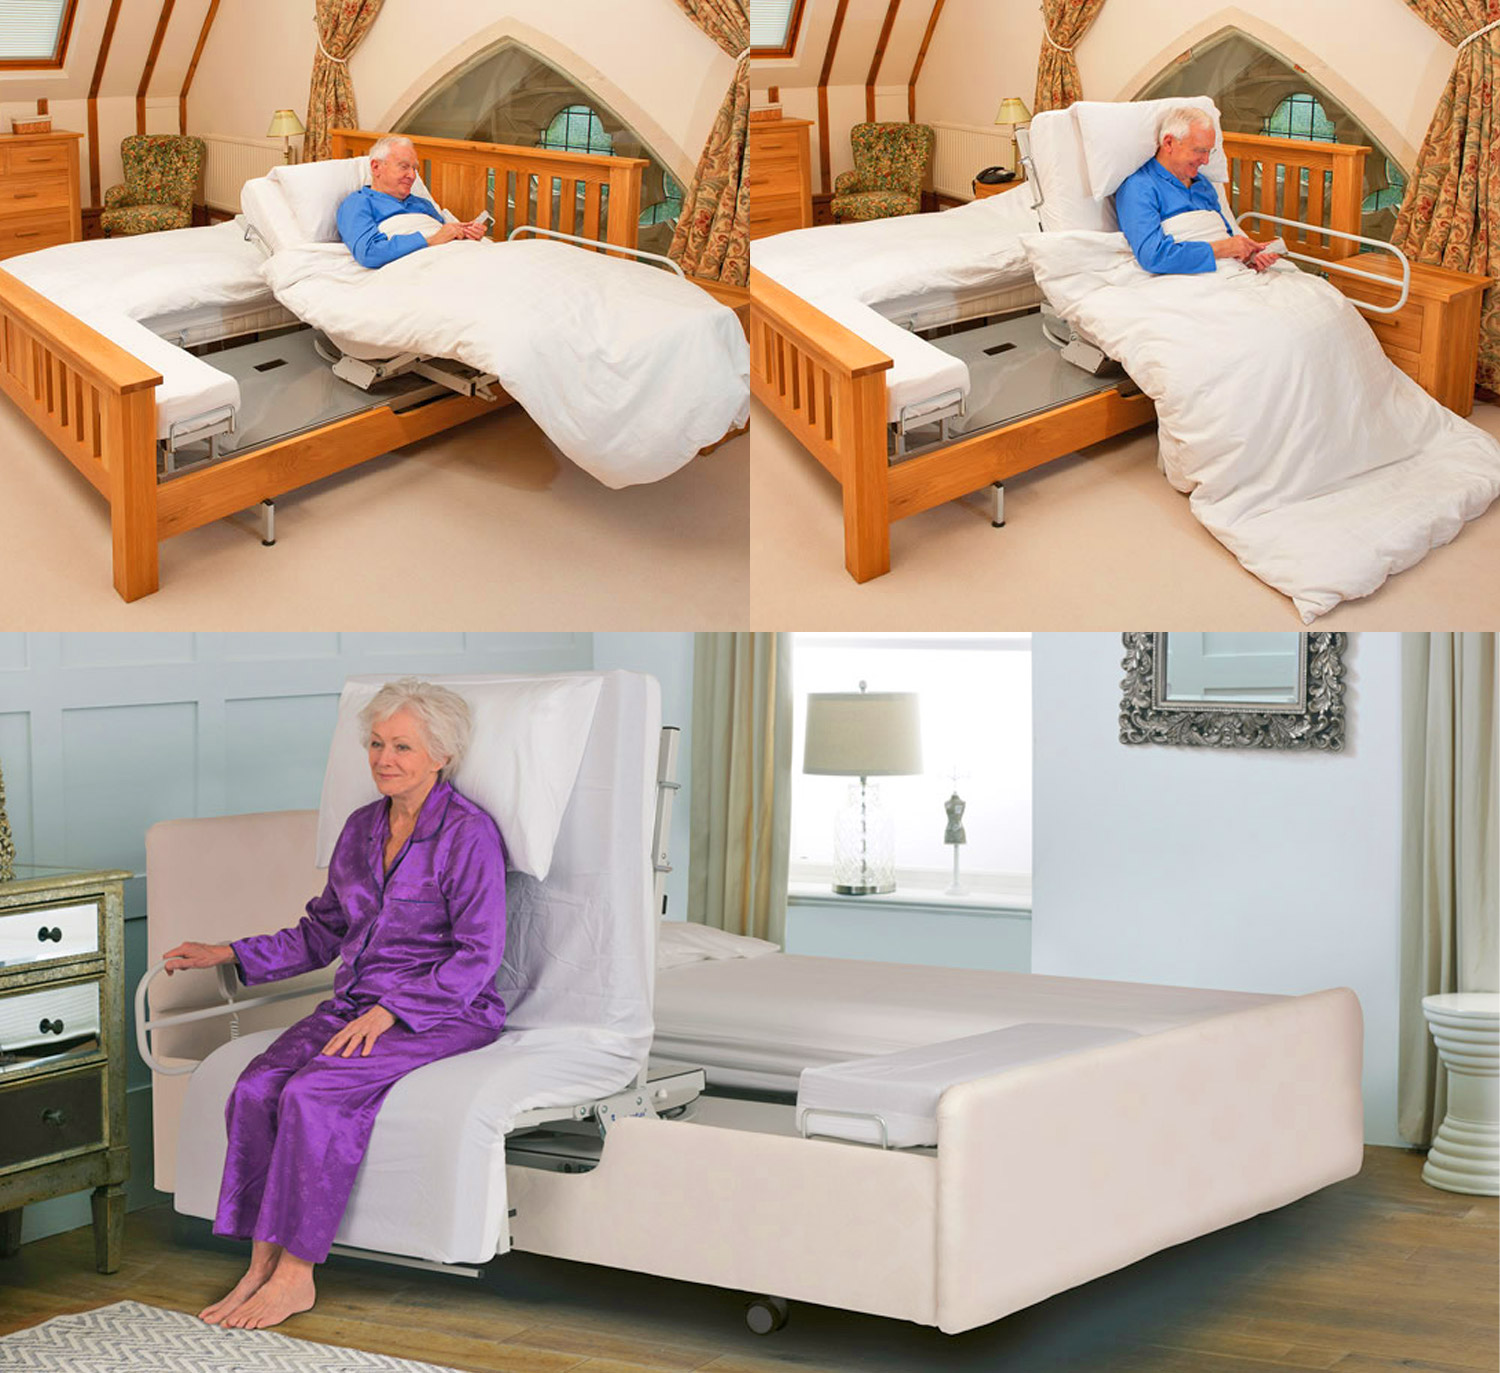 This Automatic Rotating Bed Helps Those In Need Easily Get In And